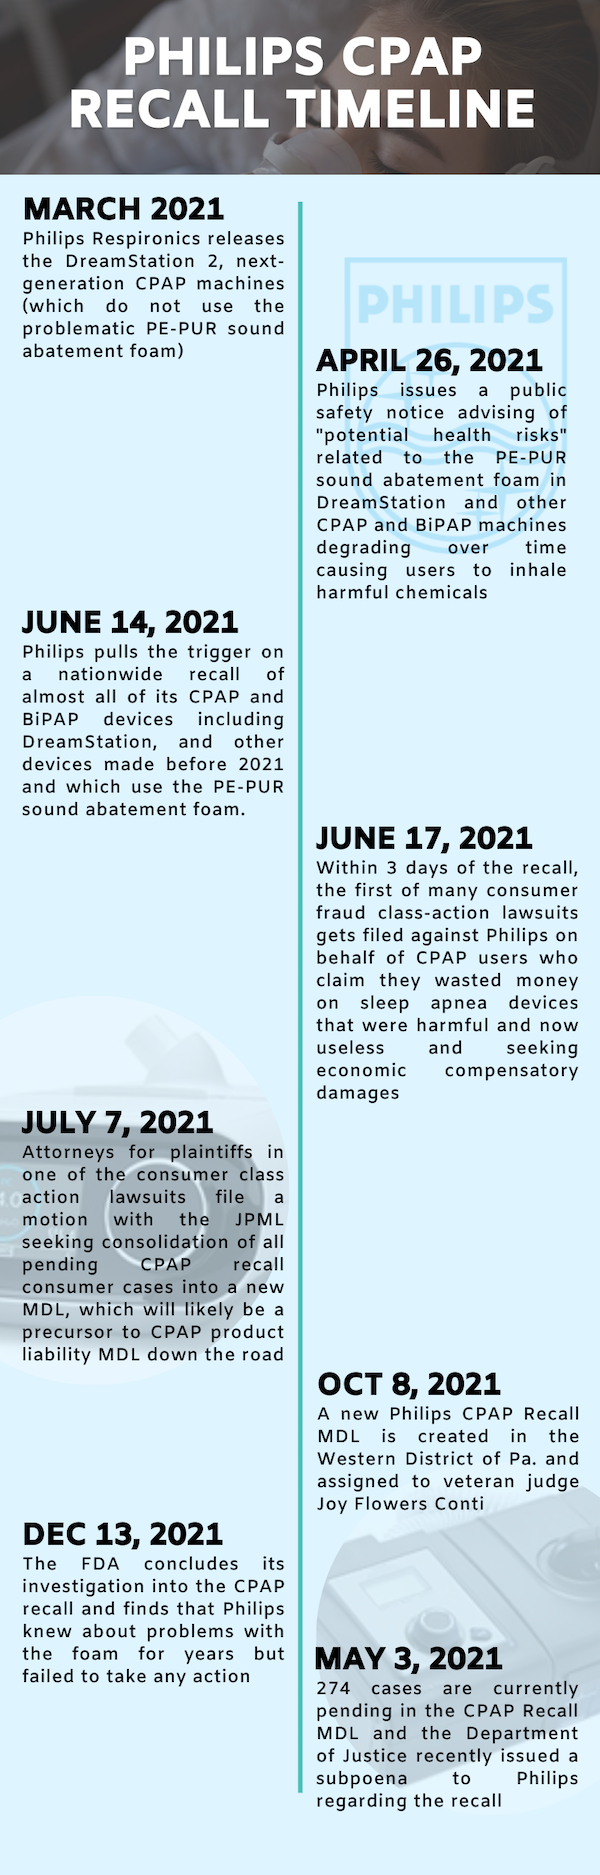 Philips CPAP Recall Timeline